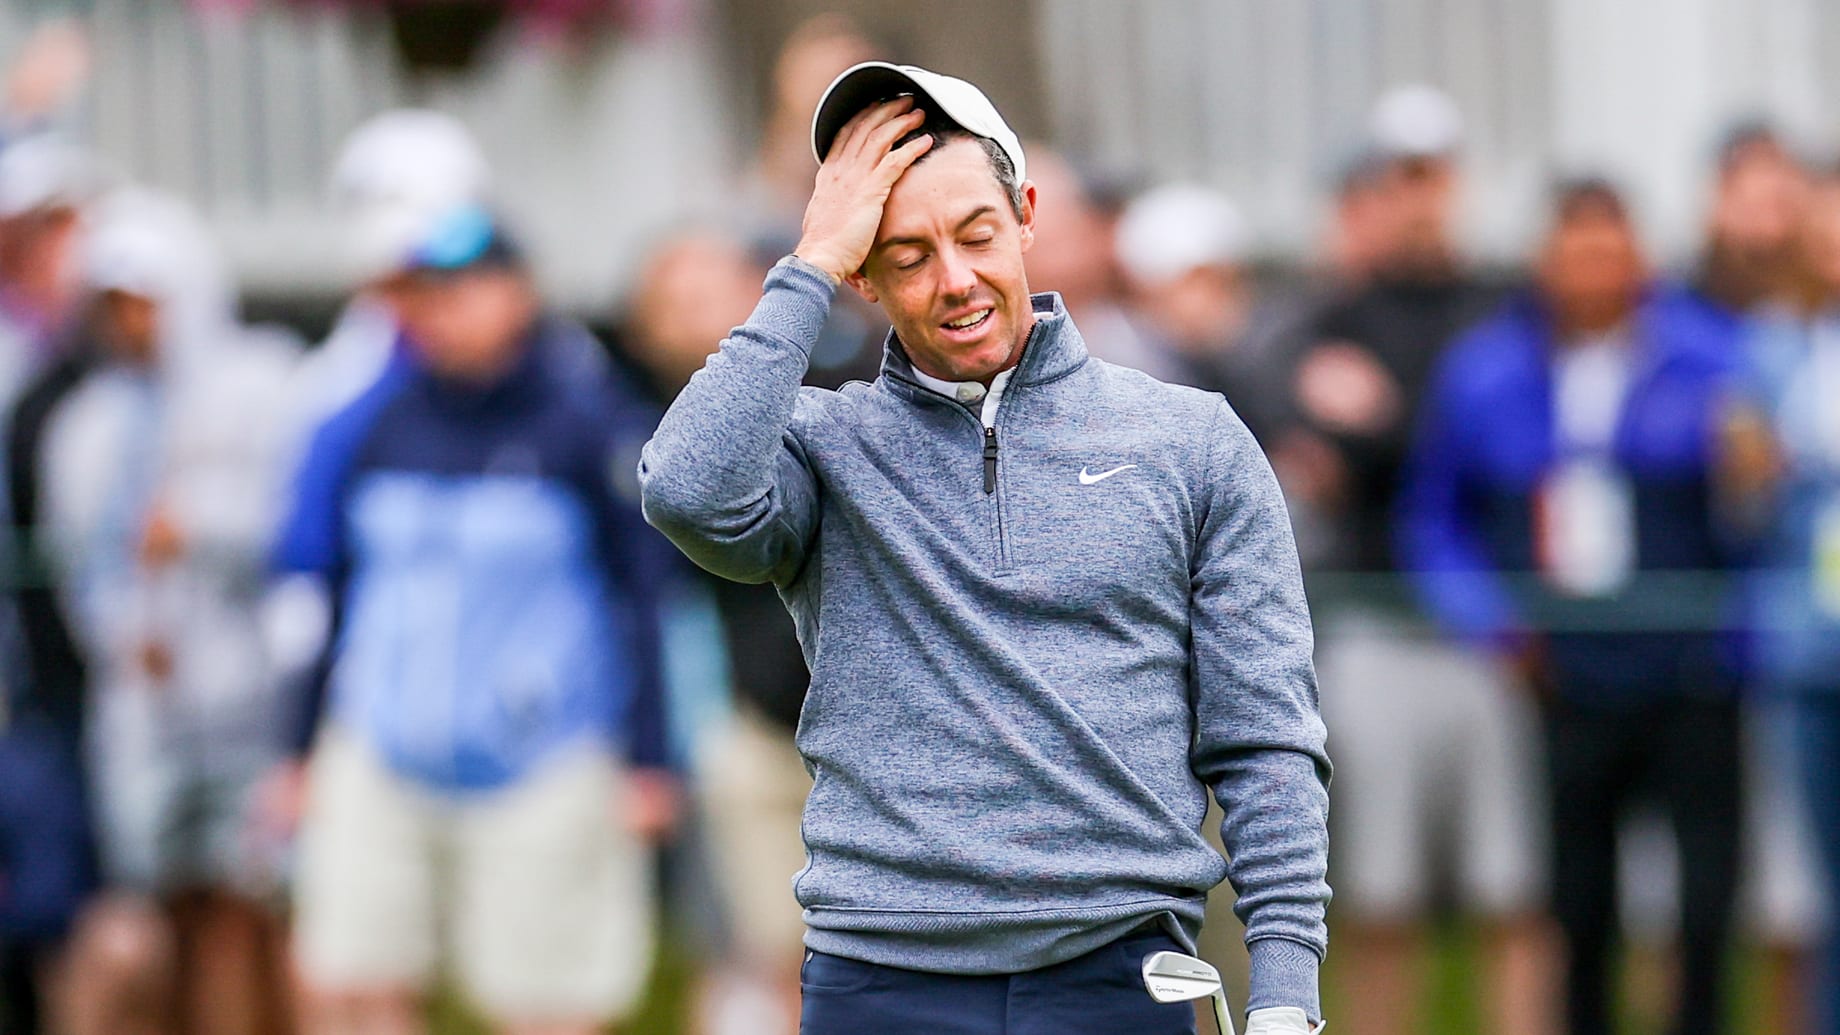 Rory mcilroy reaction at us open saturday by kathryn riley